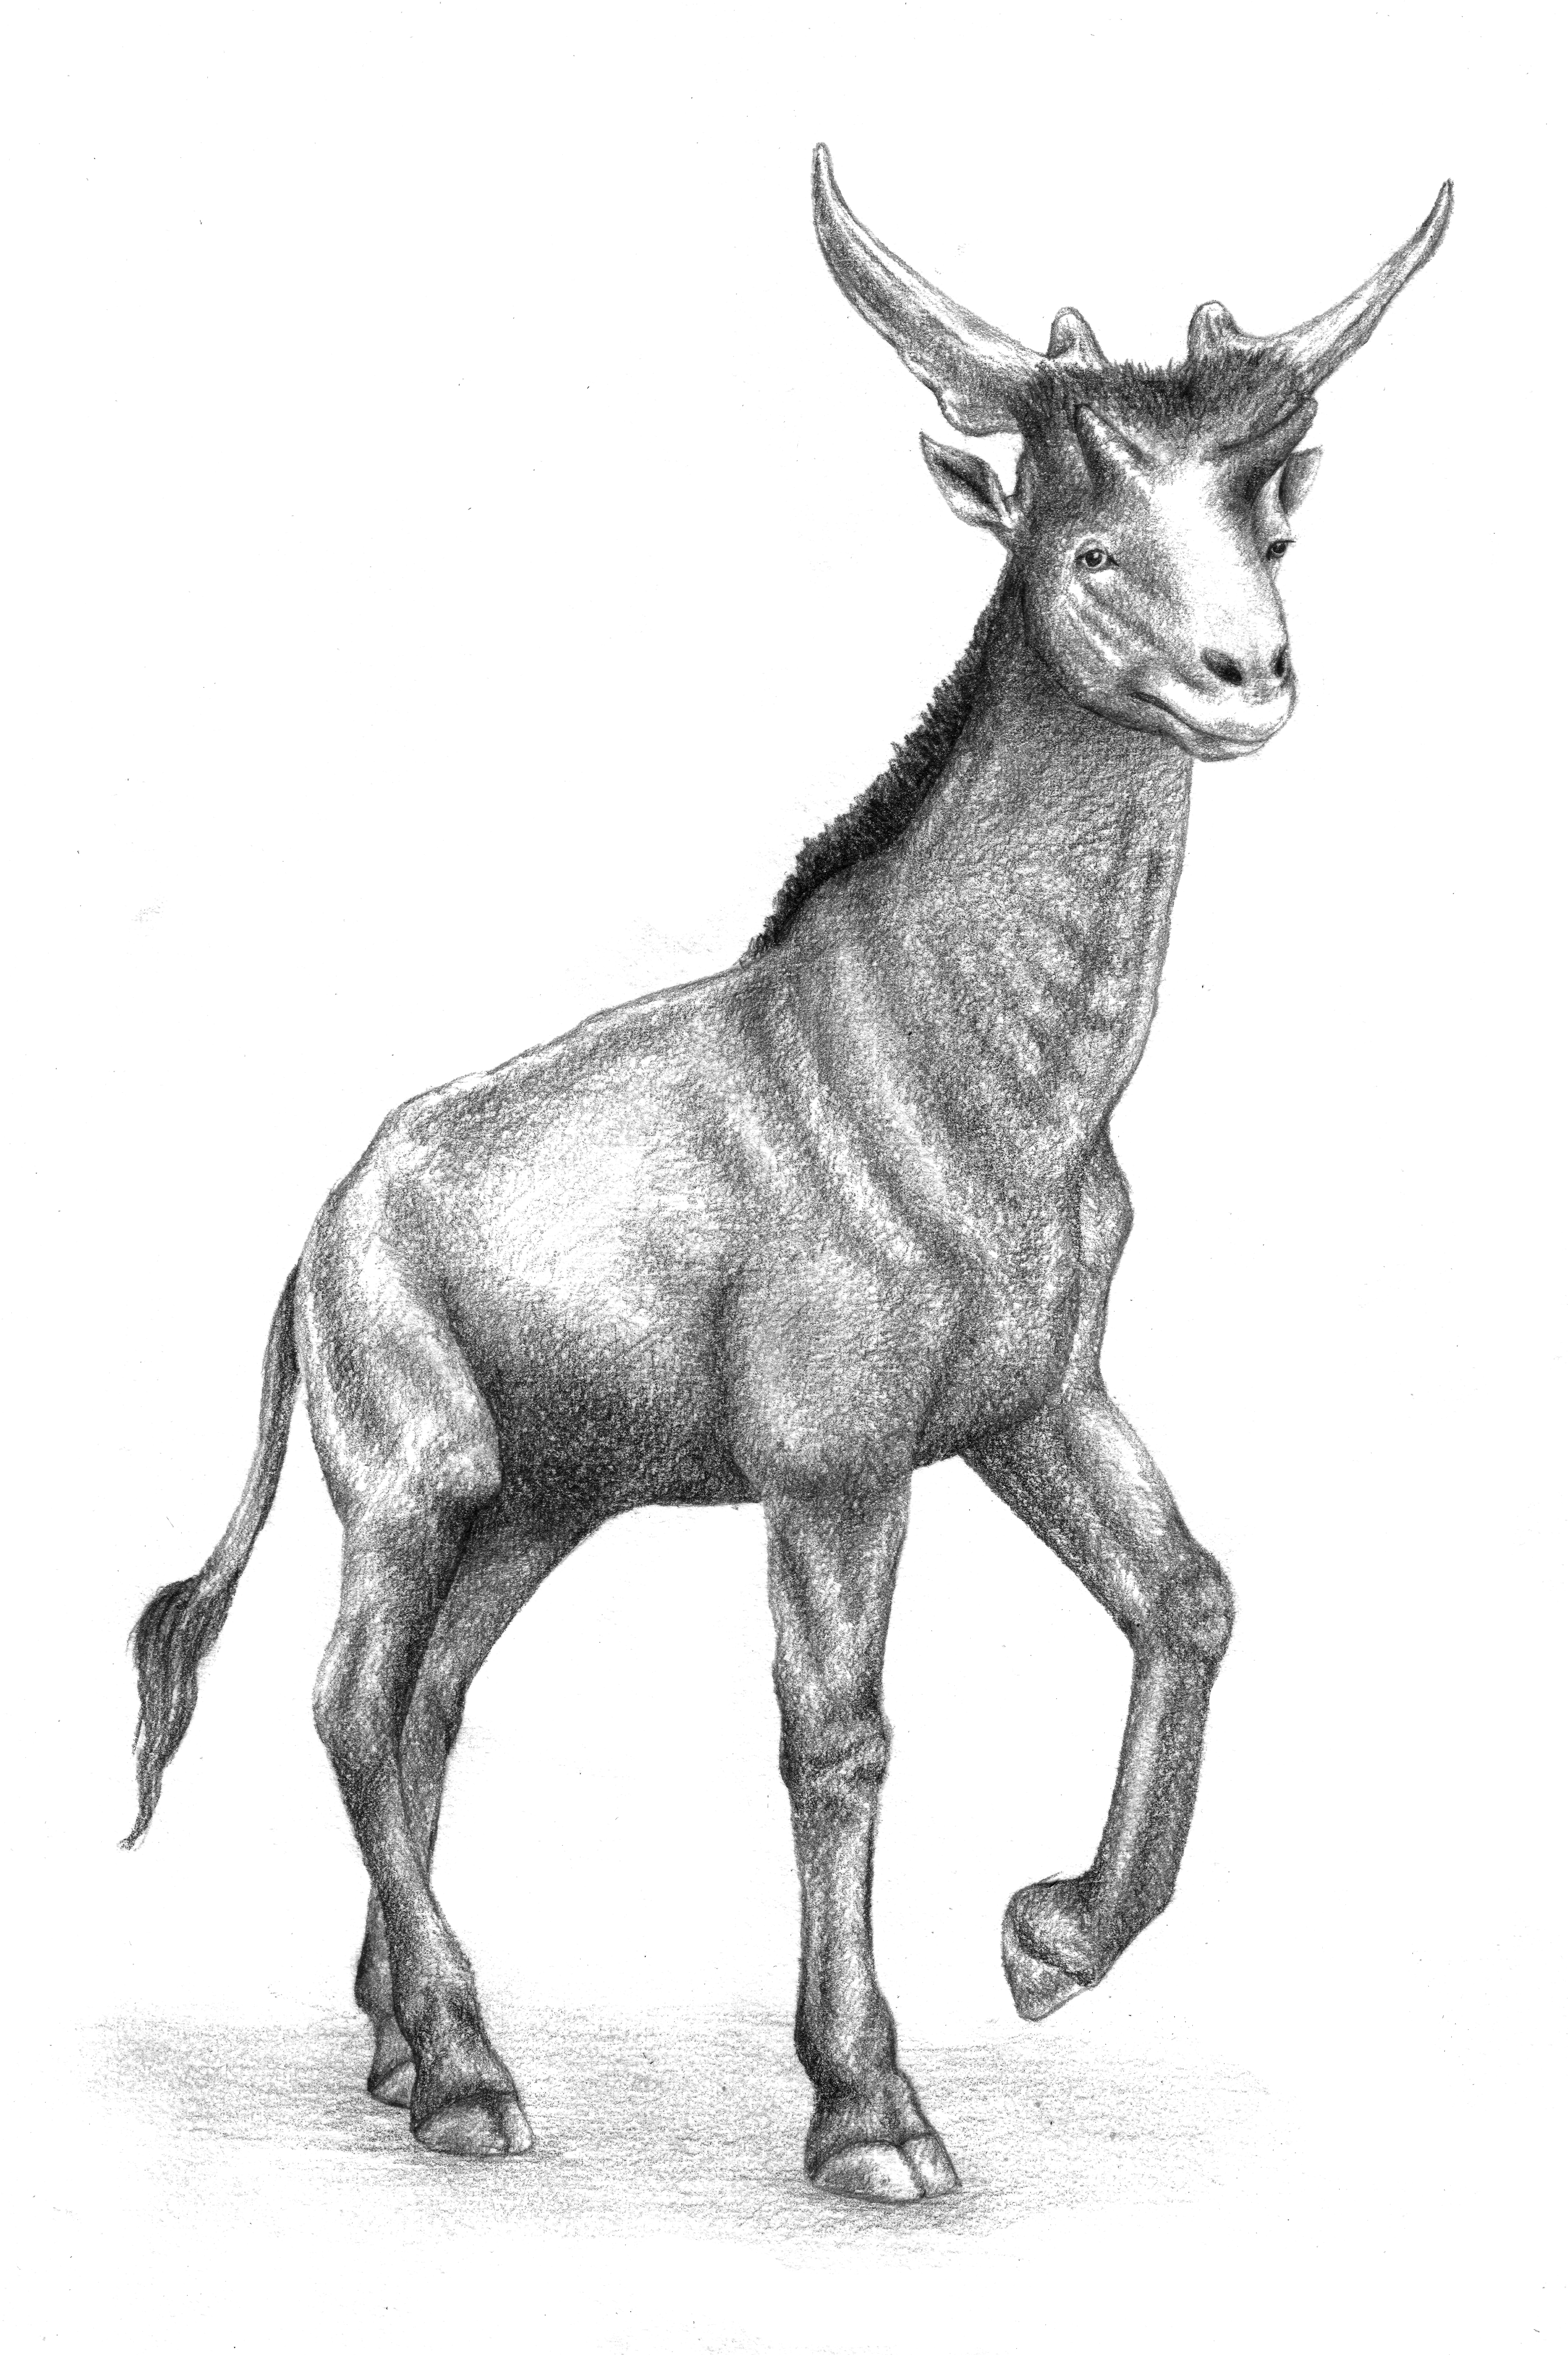 Illustration from the book, showing how the whole sivathere may have looked